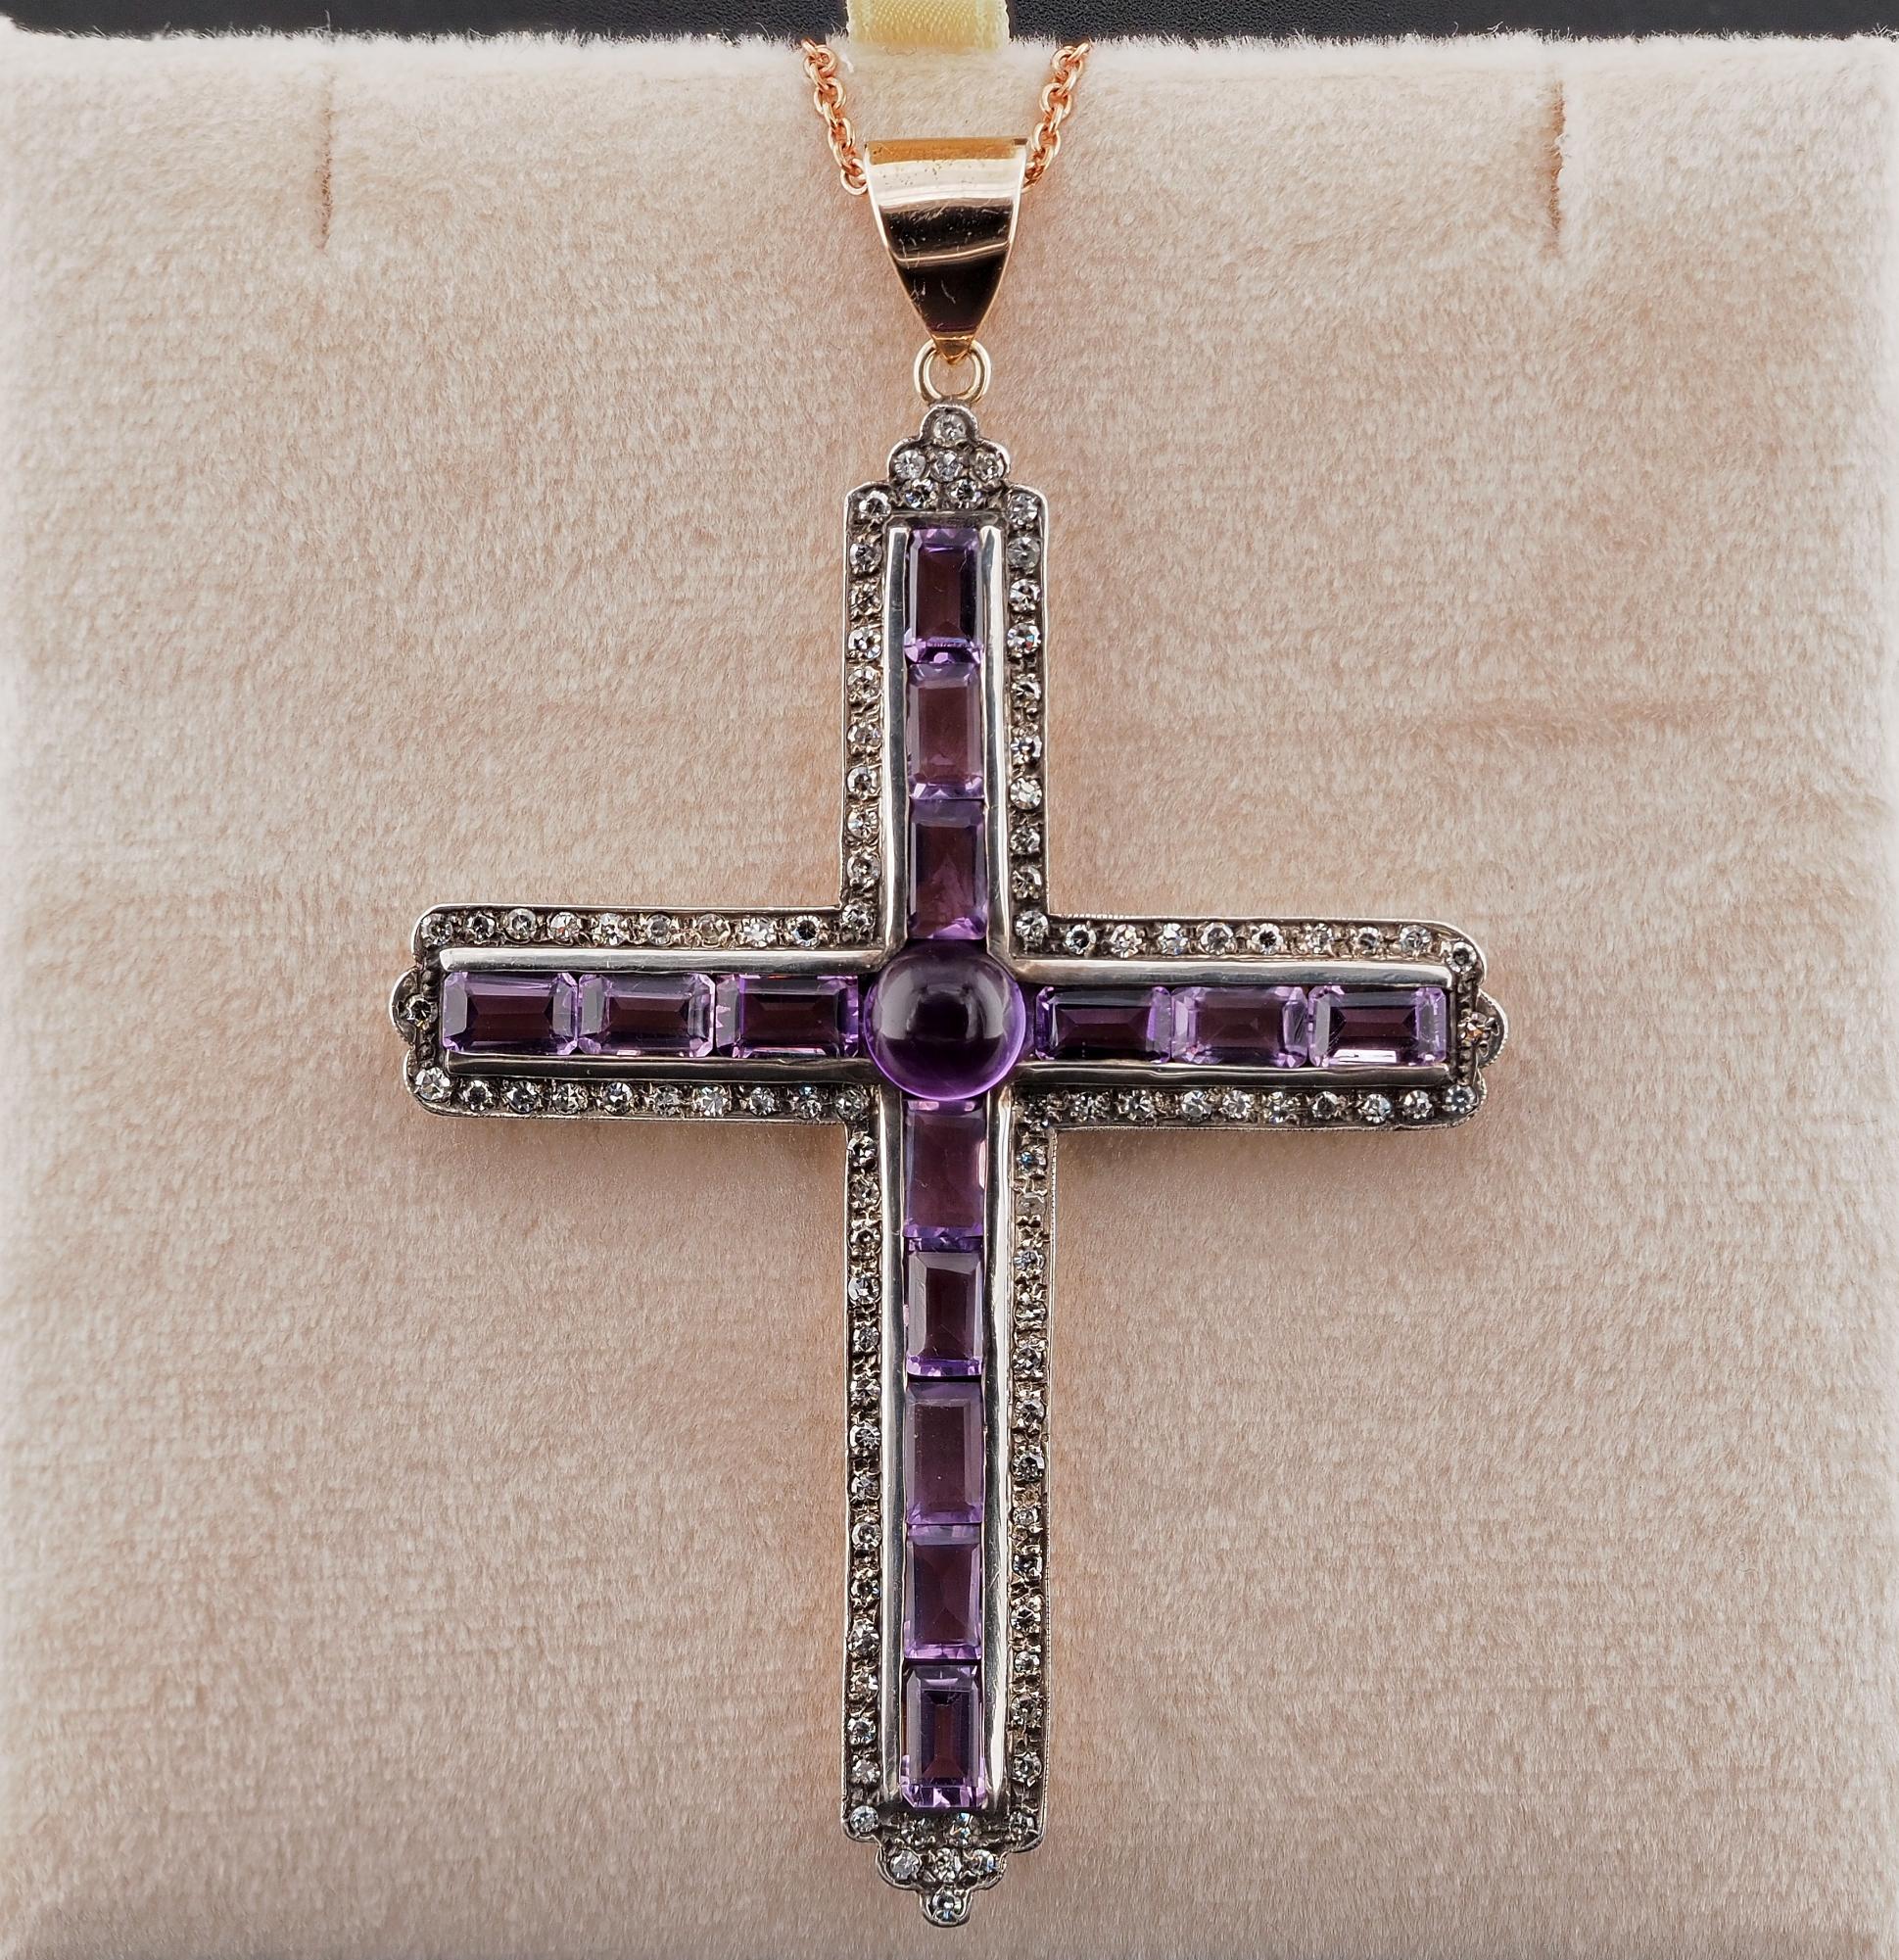 Stunning Antique Cross
This superb antique Diamond and Amethyst cross is 1905 ca.
Very large and impressive past artwork beautifully rendered as unique piece of jewellery of solid 18 KT gold silver topped for the Diamond housing
The captivating